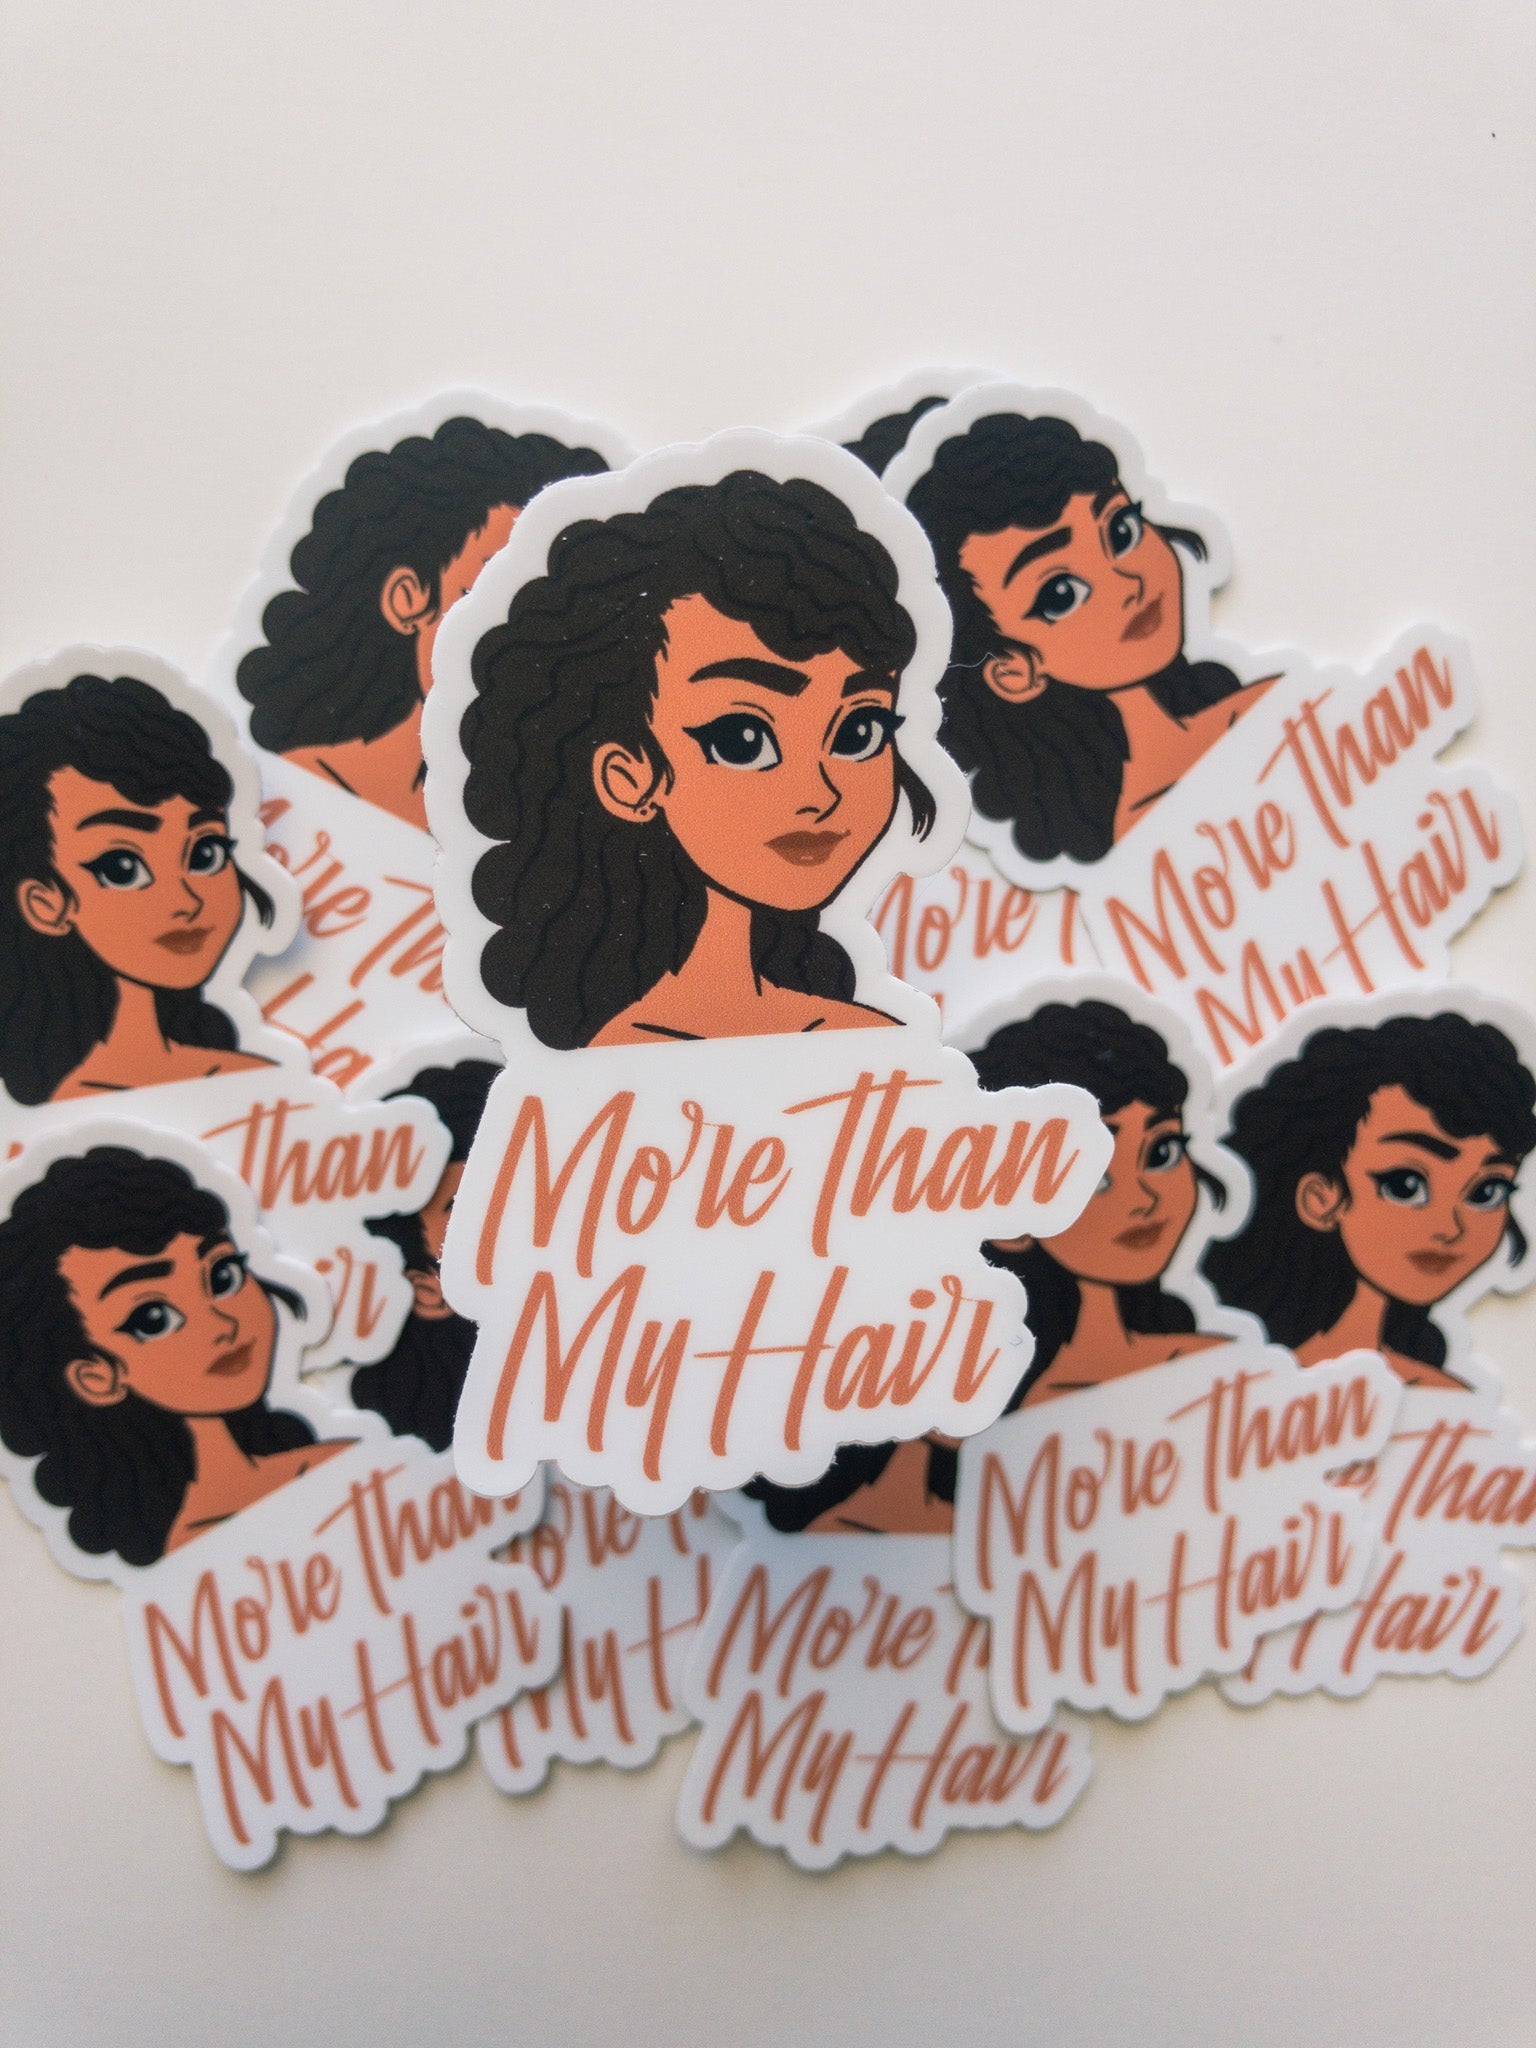 More Than My Hair Sticker - Mosaic the Label